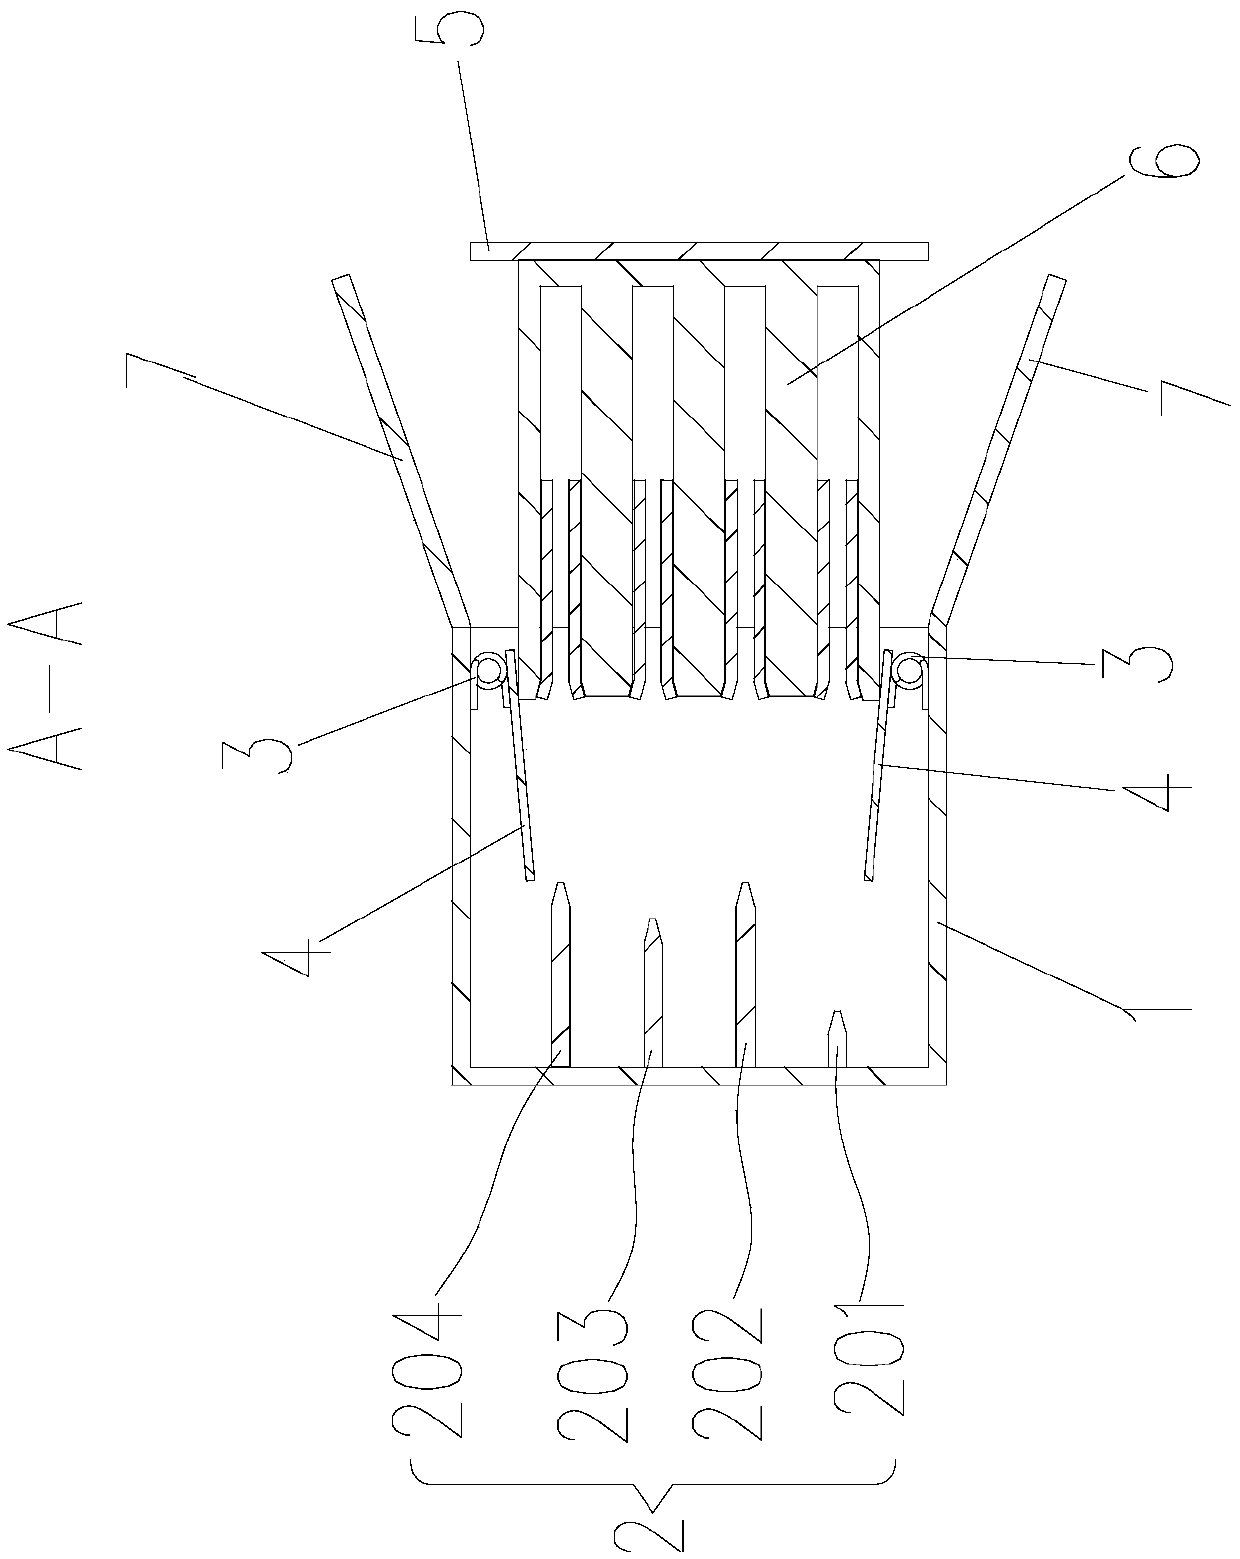 Waterproof and dustproof electric connector and pantograph charging connection structure